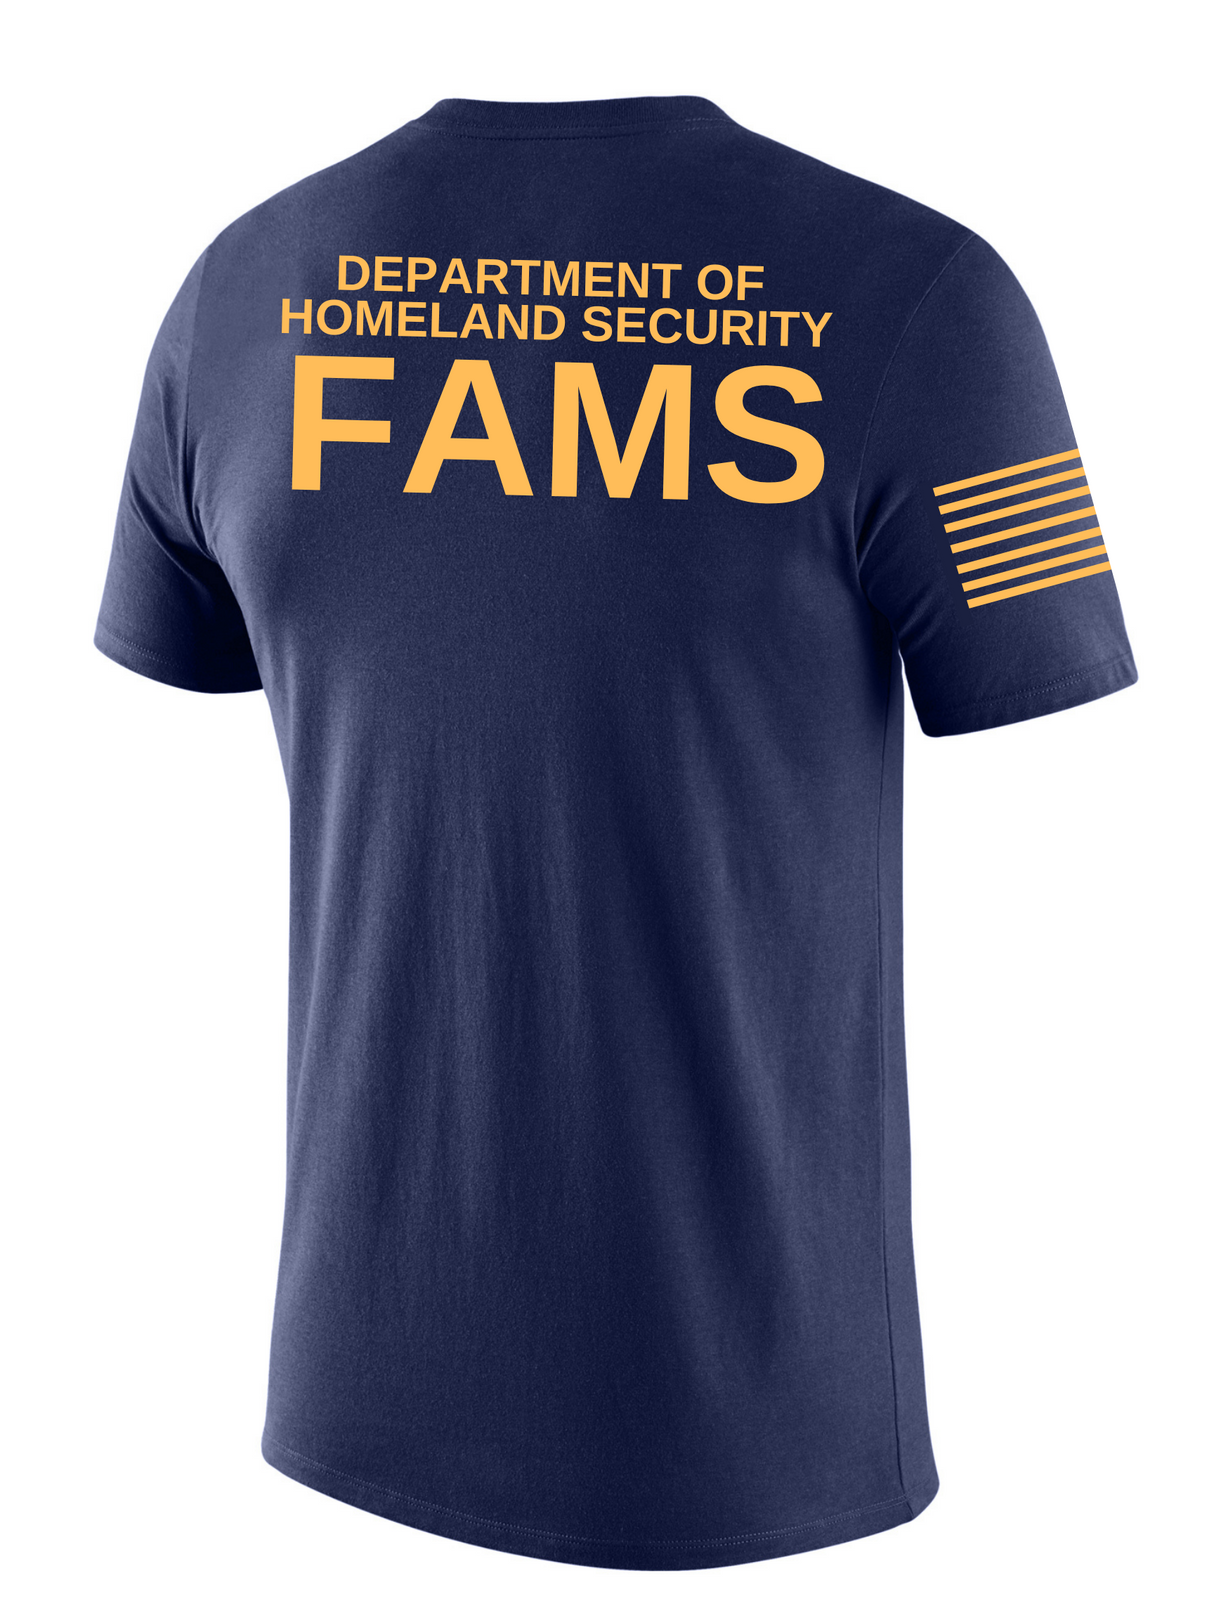 DHS FAMS Agency Identifier T Shirt - Short Sleeve - FEDS Apparel